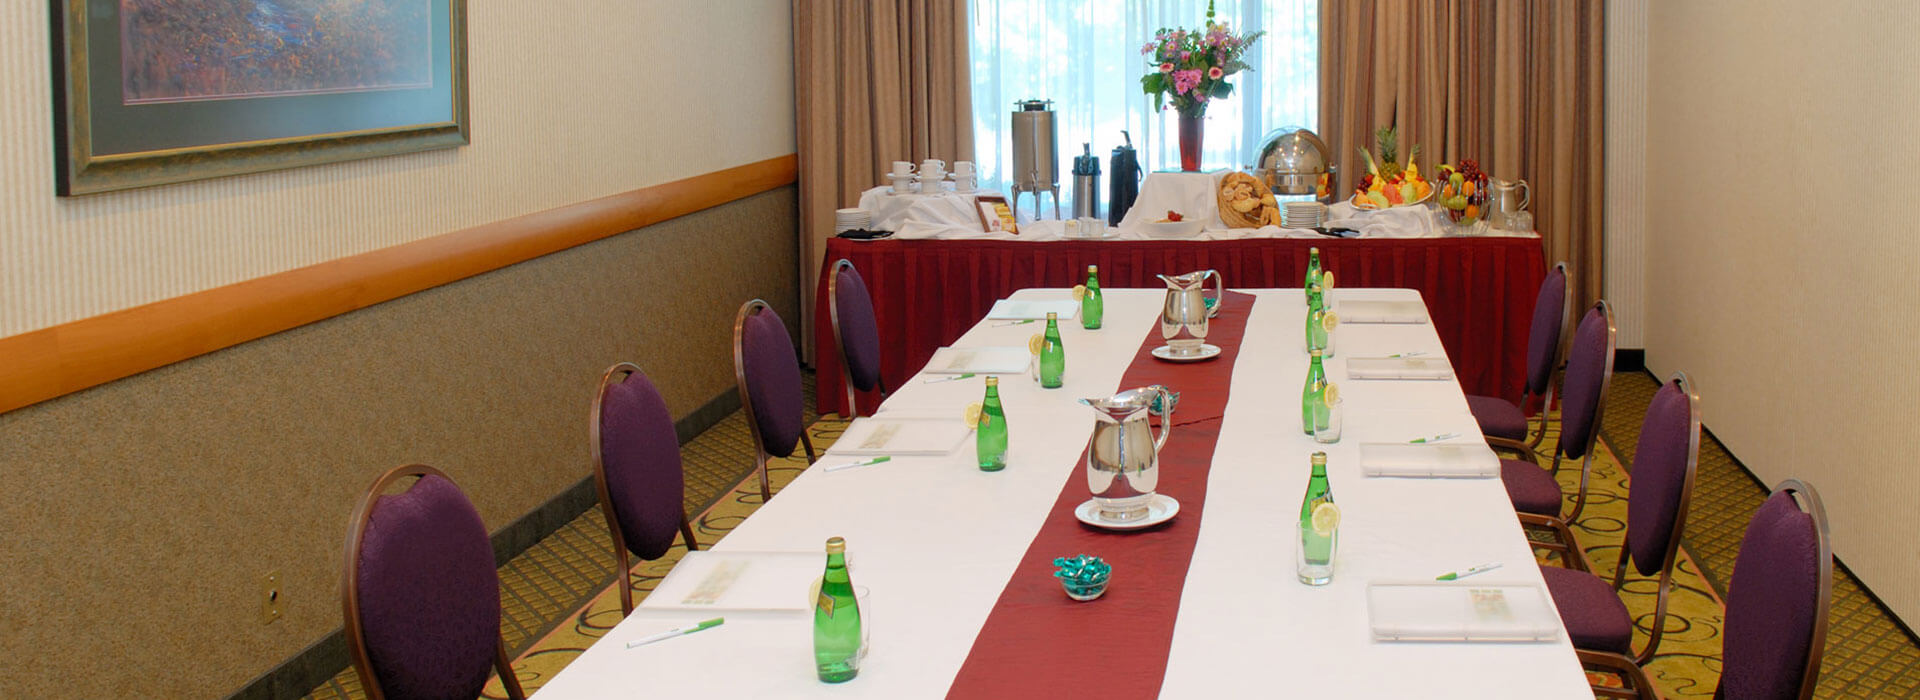 Meeting and conference room - Lillooet Room at Holiday Inn North Vancouver   